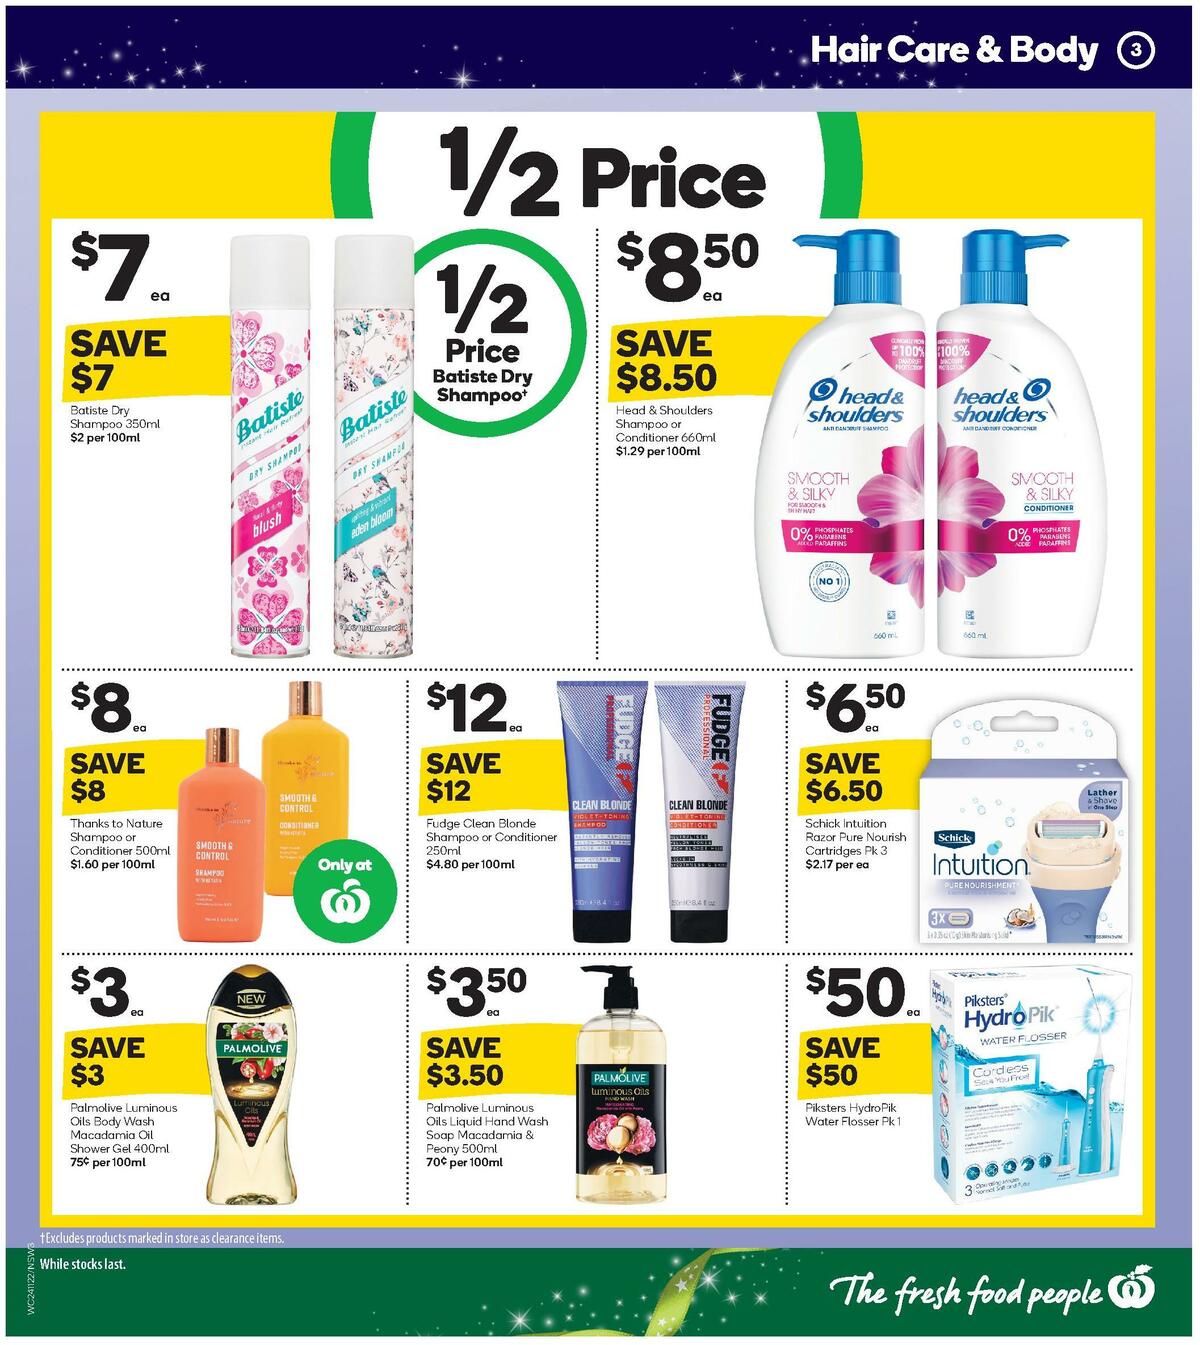 Woolworths Health & Beauty Catalogues from 24 November